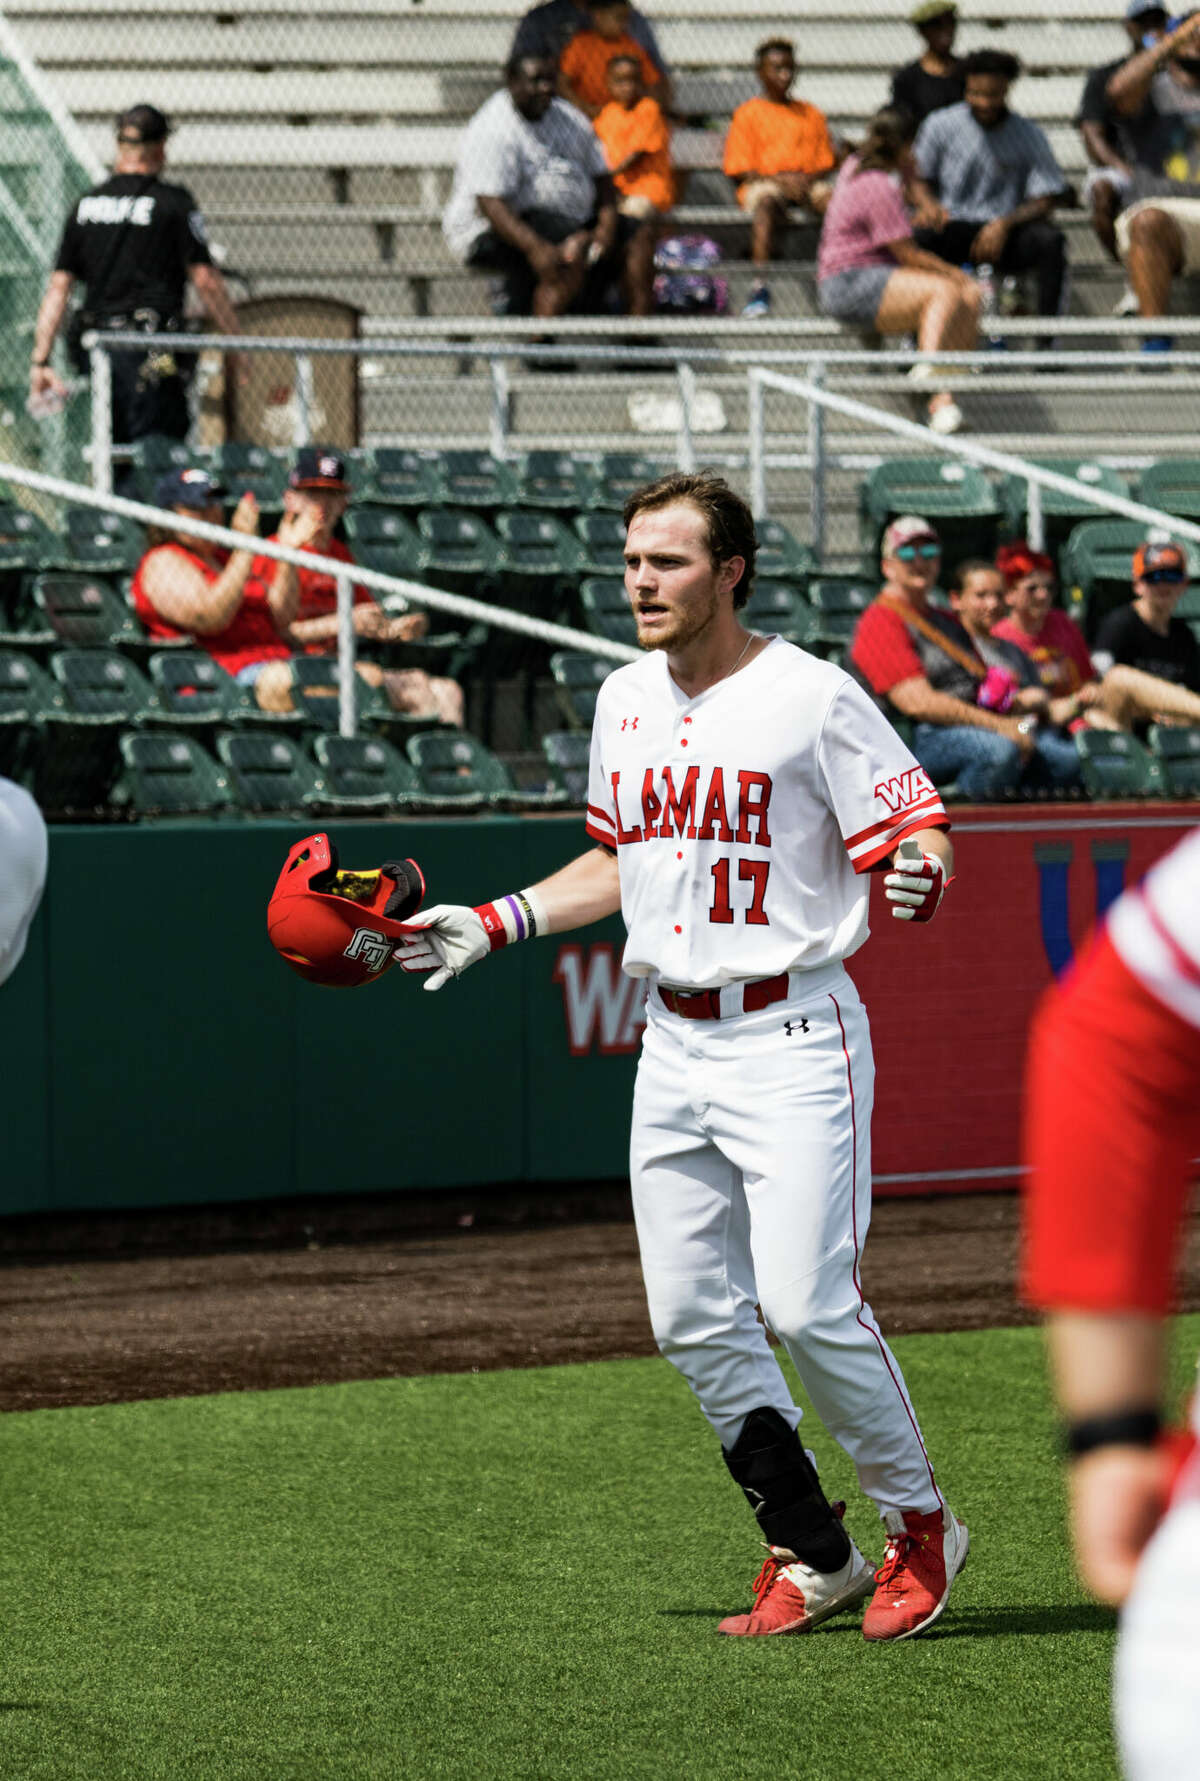 The Lamar Cardinals defeated UT Rio Grande Valley Saturday, May 7, to move alone into second place in the WAC Southwest Division. The Cardinals clinched a spot in the WAC tournament.